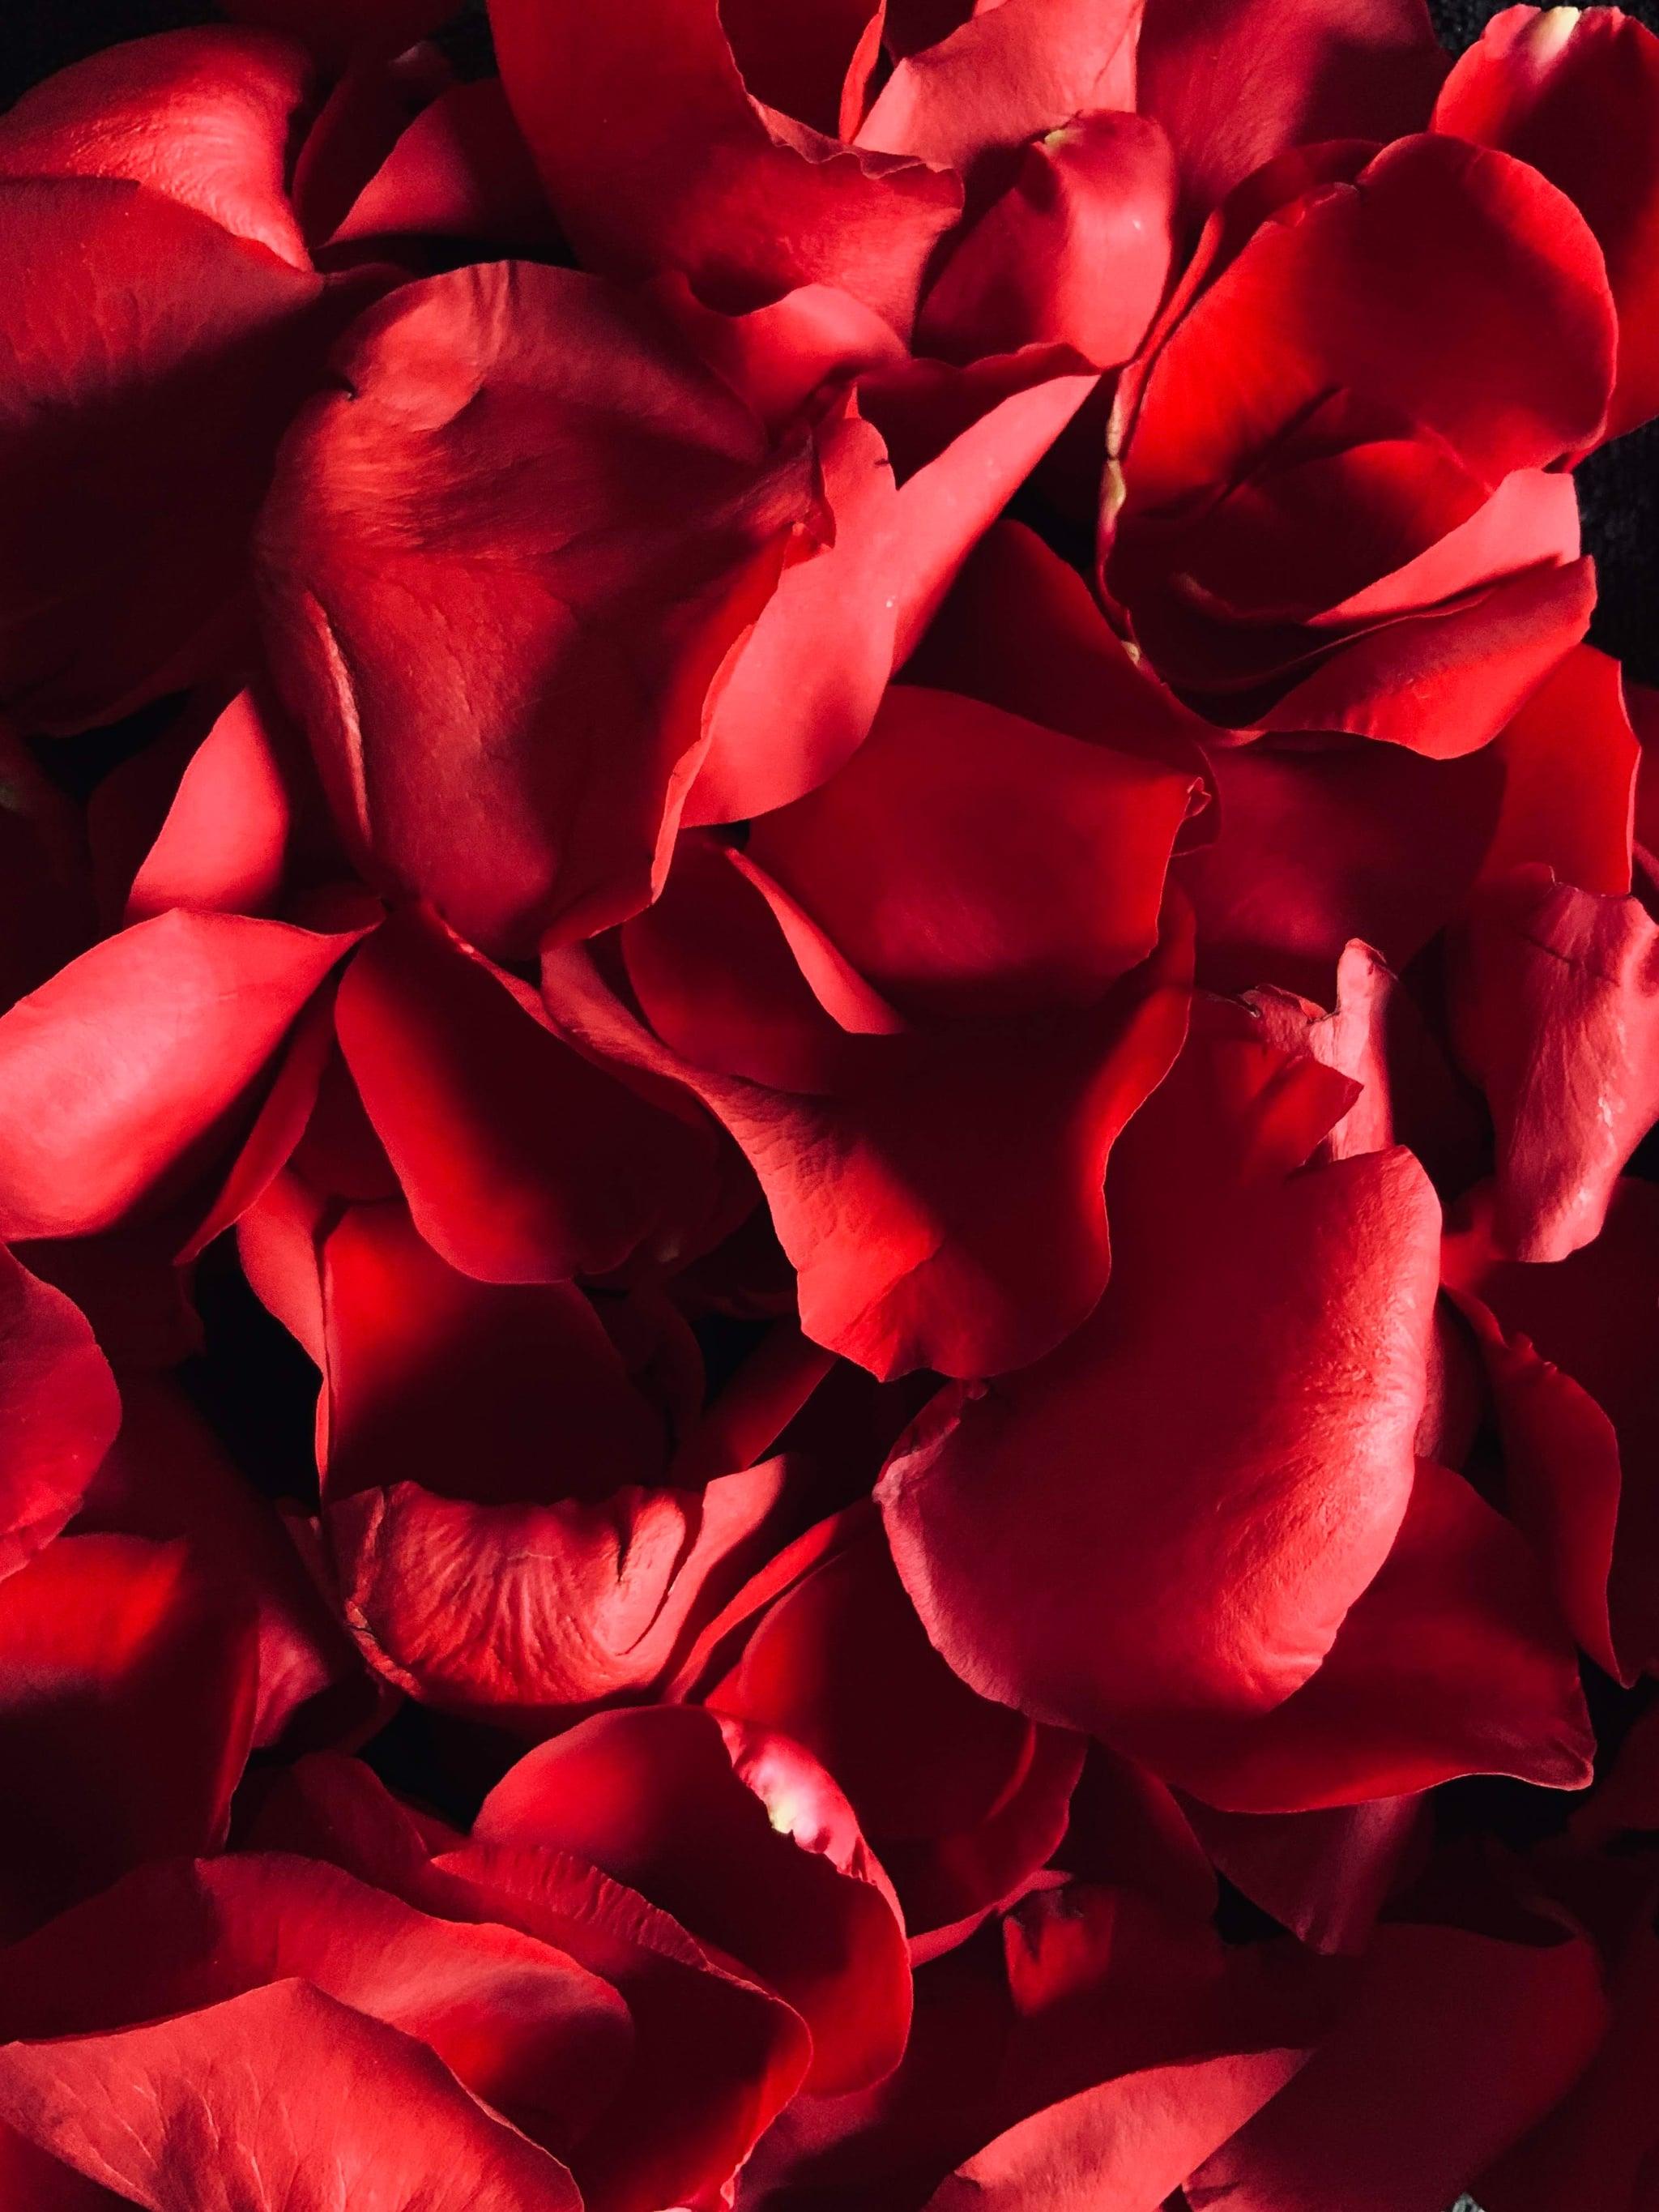 Valentine S Day Wallpaper Red Rose Petals The Dreamiest iPhone